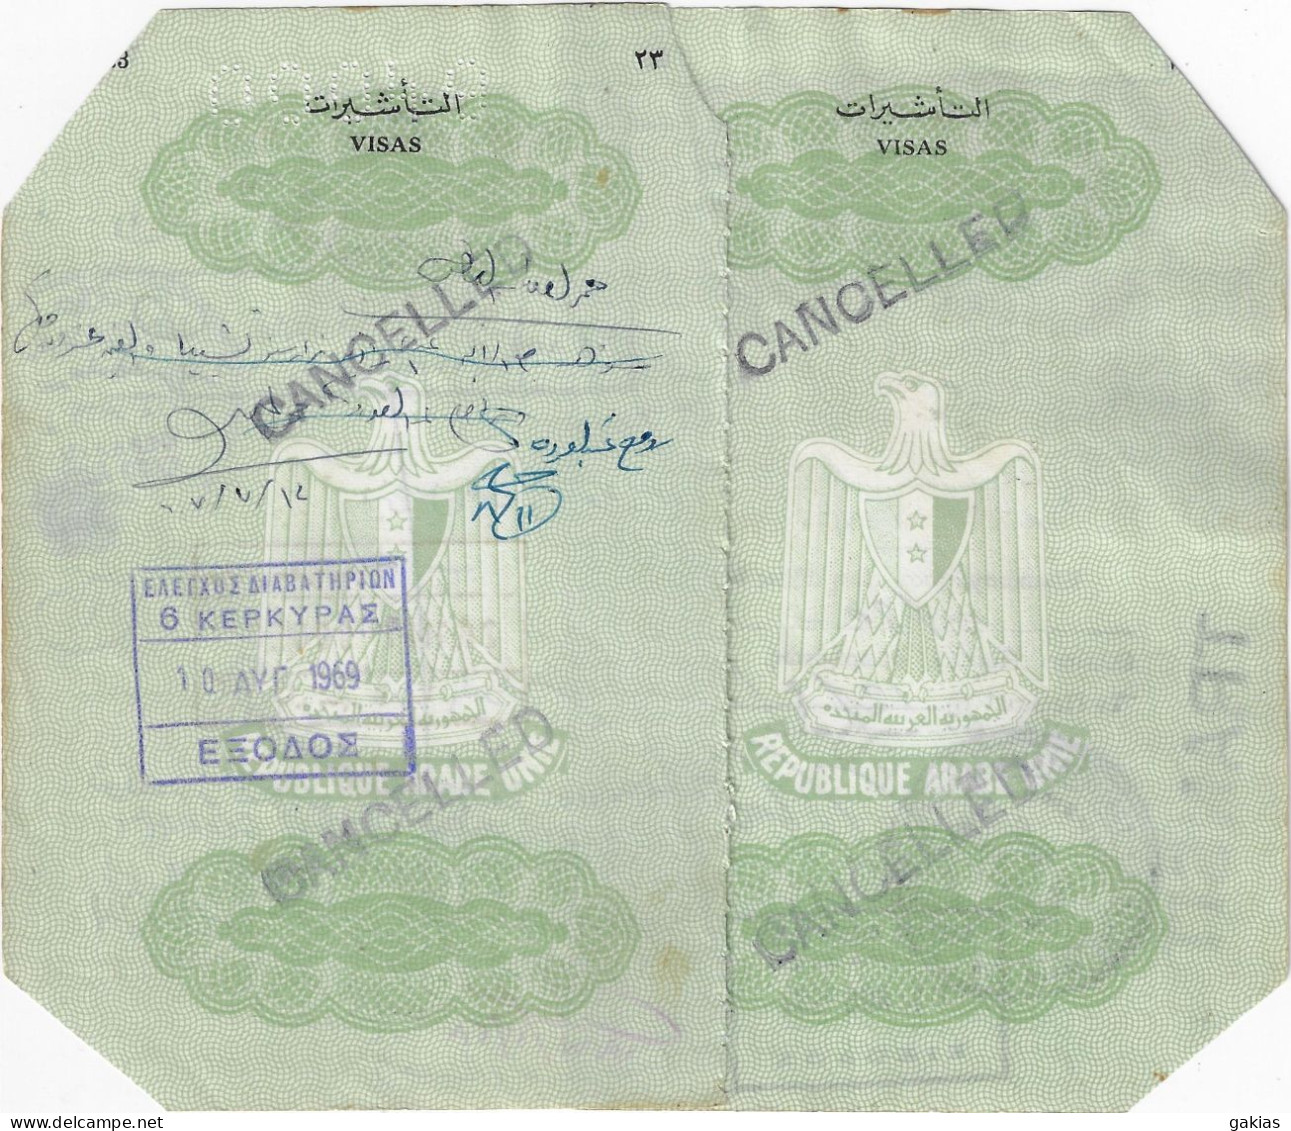 GREECE 1969, EGYPT, FISCAL STAMPS On 2 Passport Leaves. - Fiscales